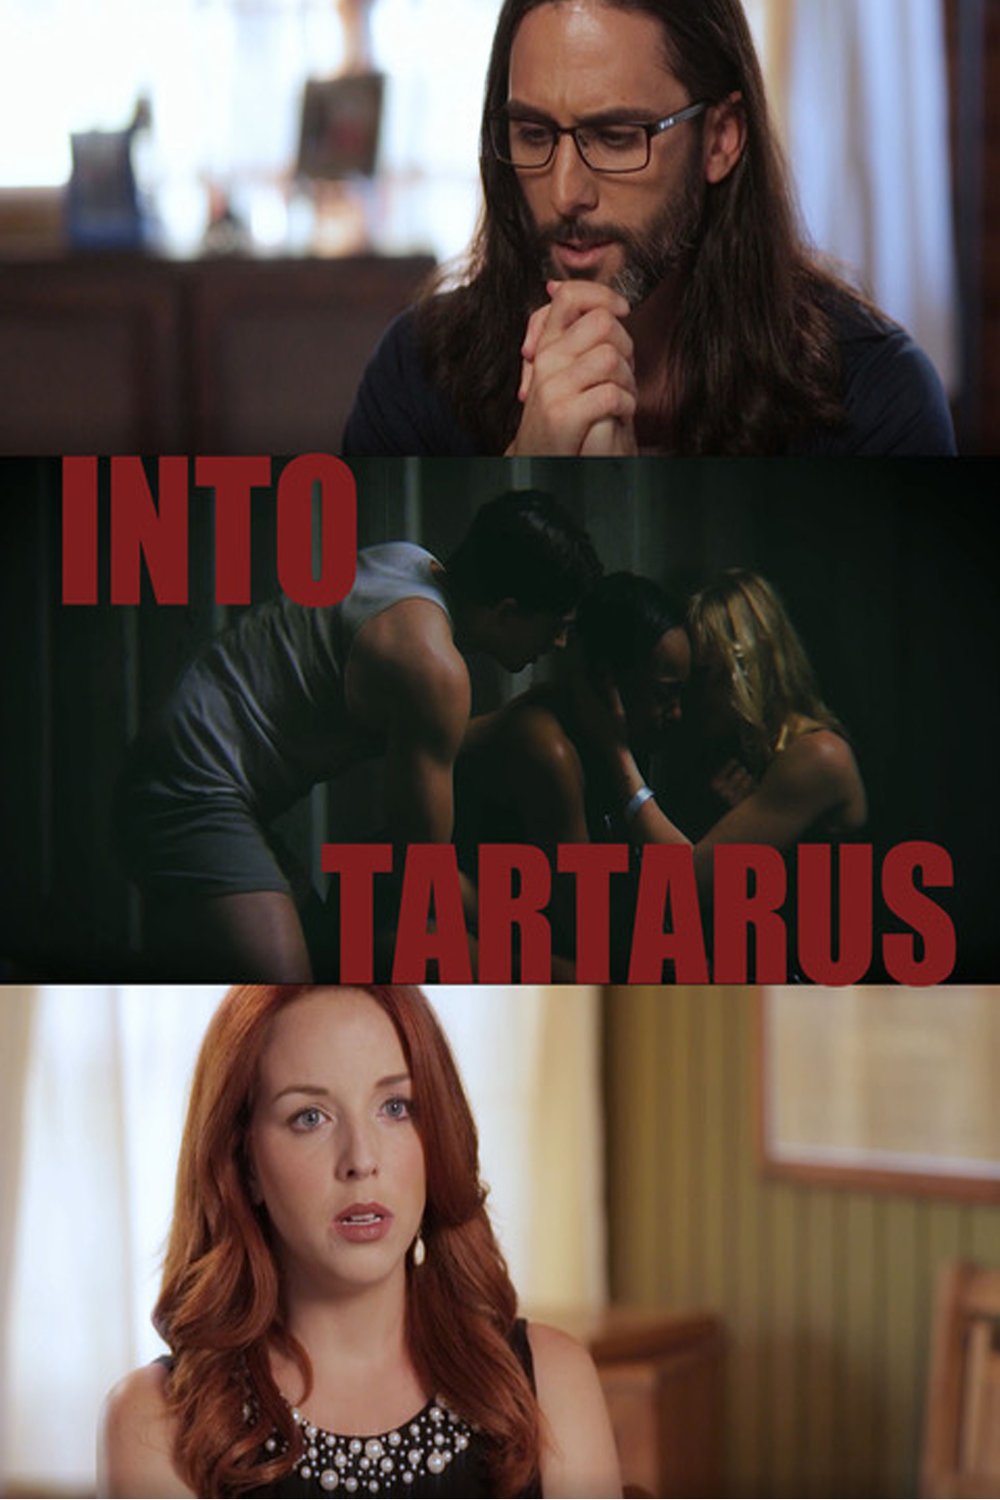 Poster of the movie Into Tartarus